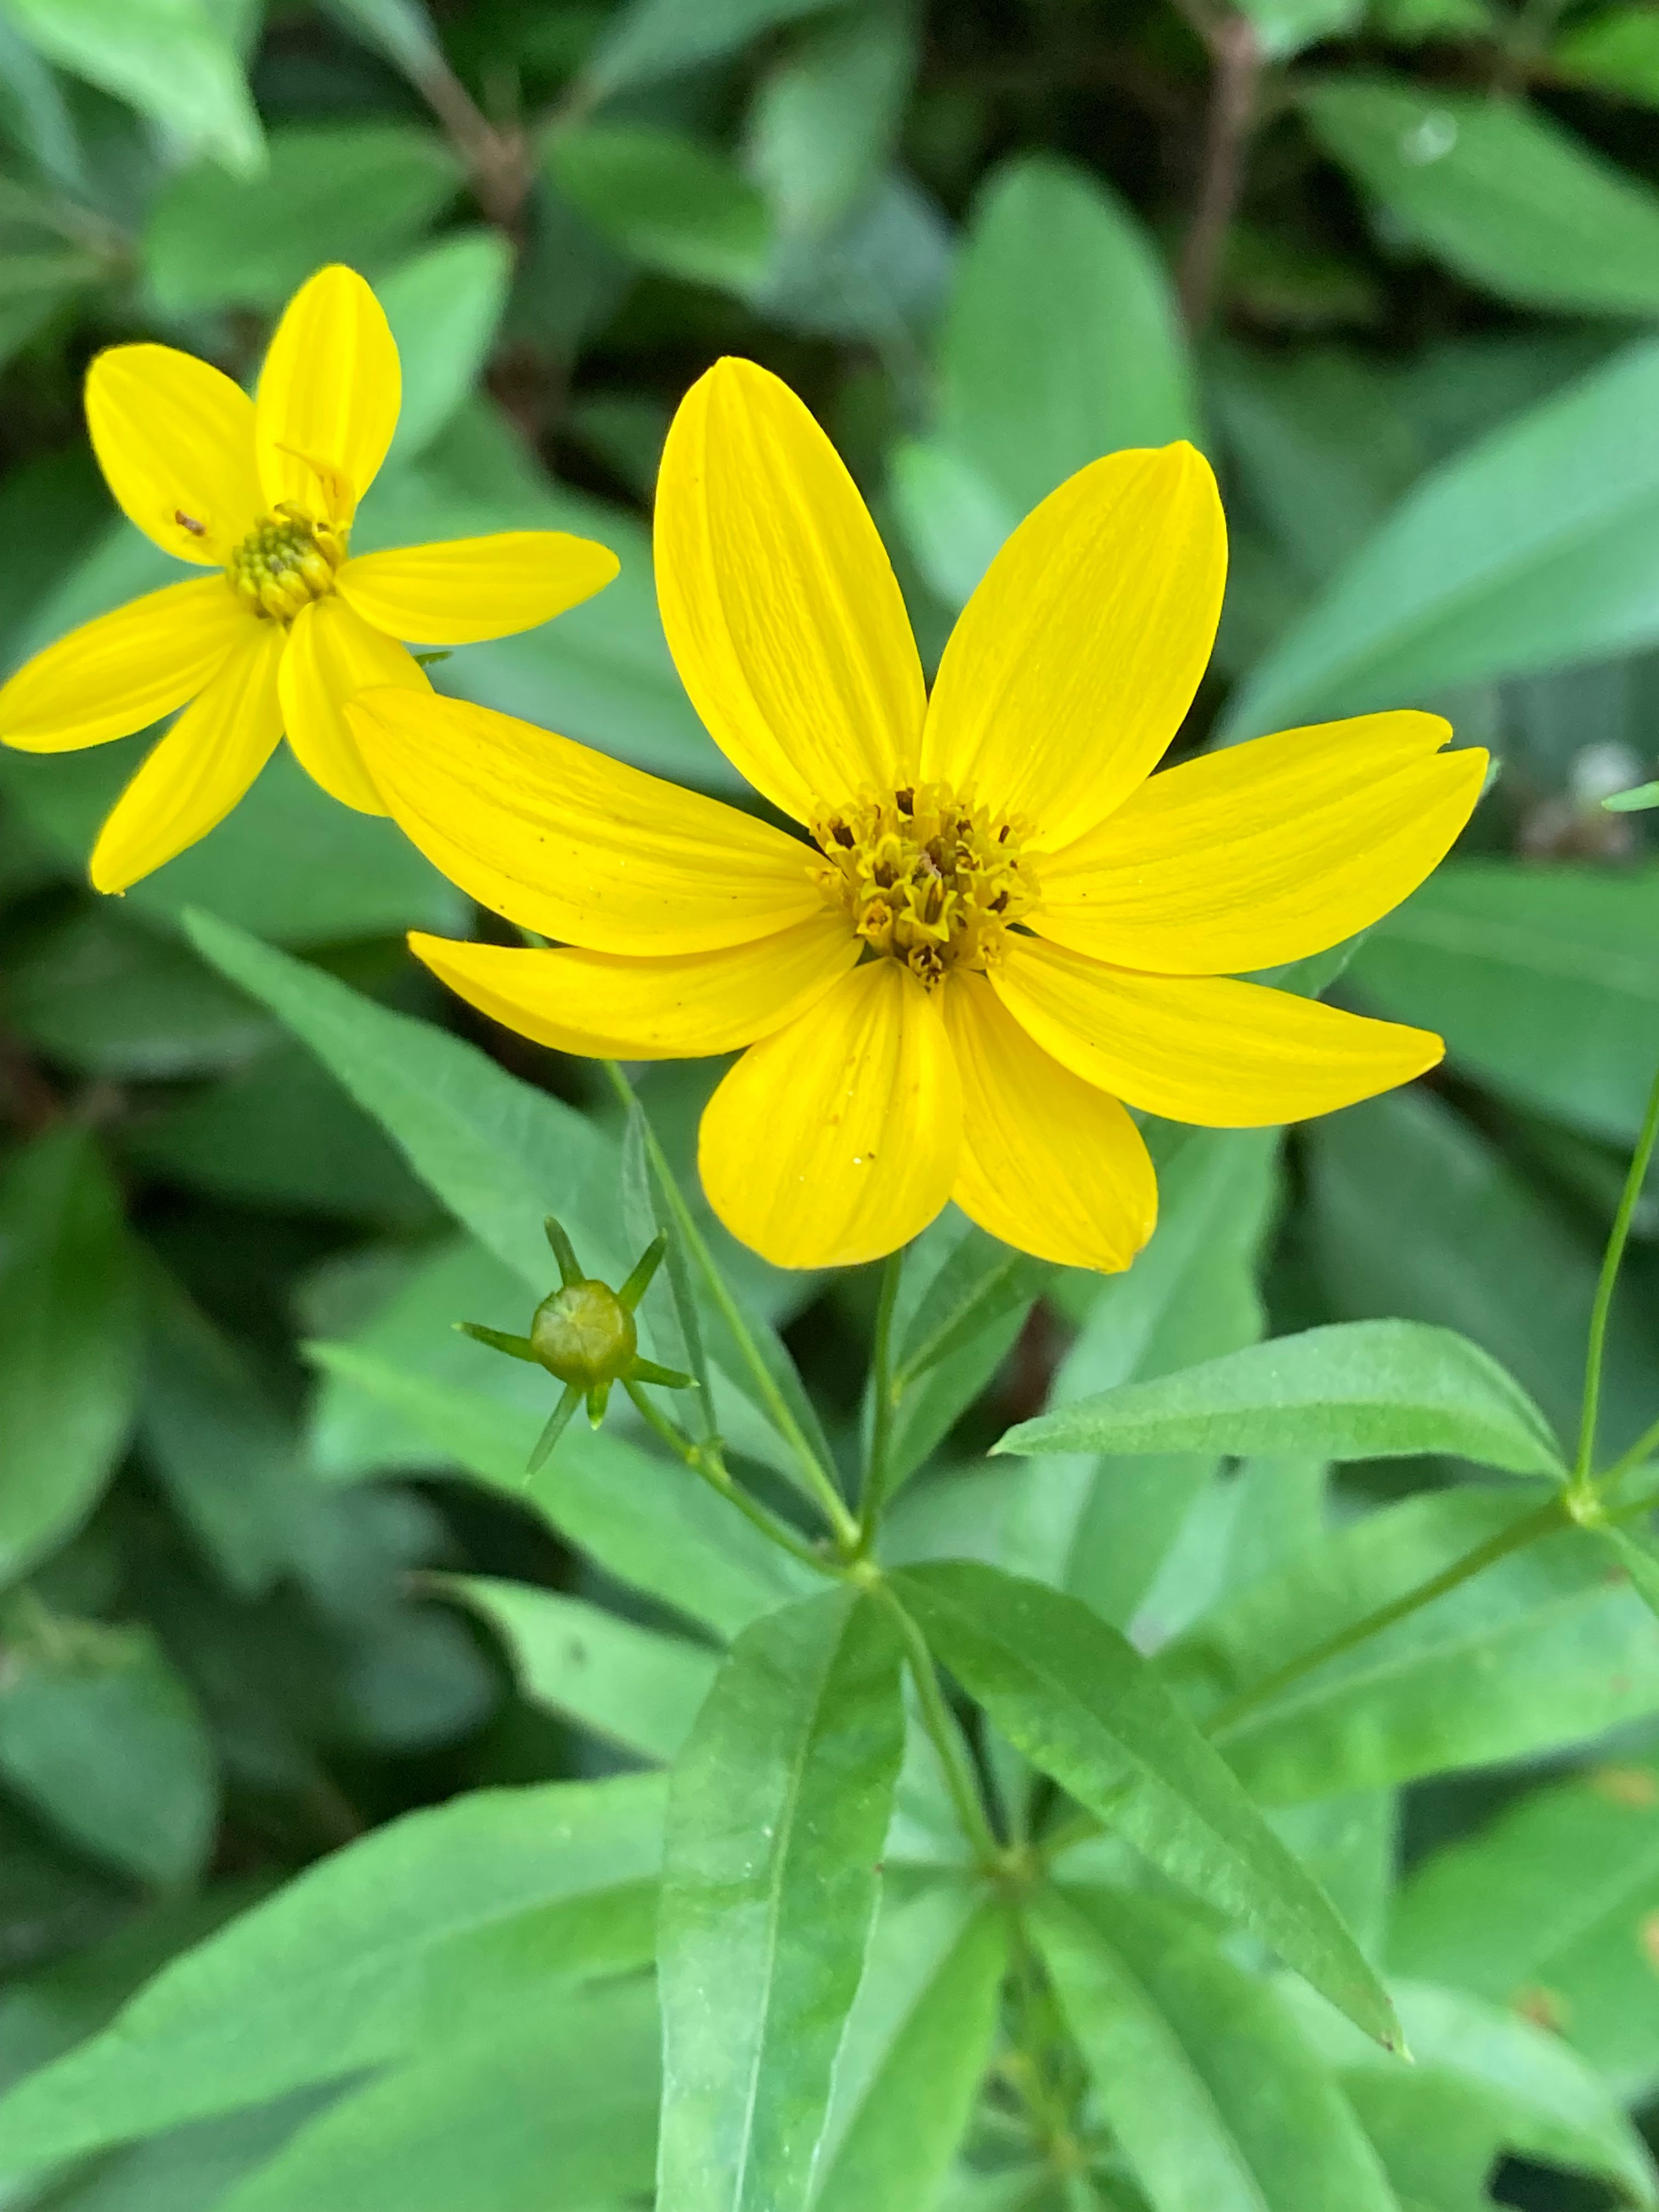 The Scientific Name is Coreopsis major. You will likely hear them called Woodland Coreopsis, Forest Tickseed. This picture shows the Untoothed yellow ray flowers are pointed at the tips. Disk flowers are also yellow. of Coreopsis major